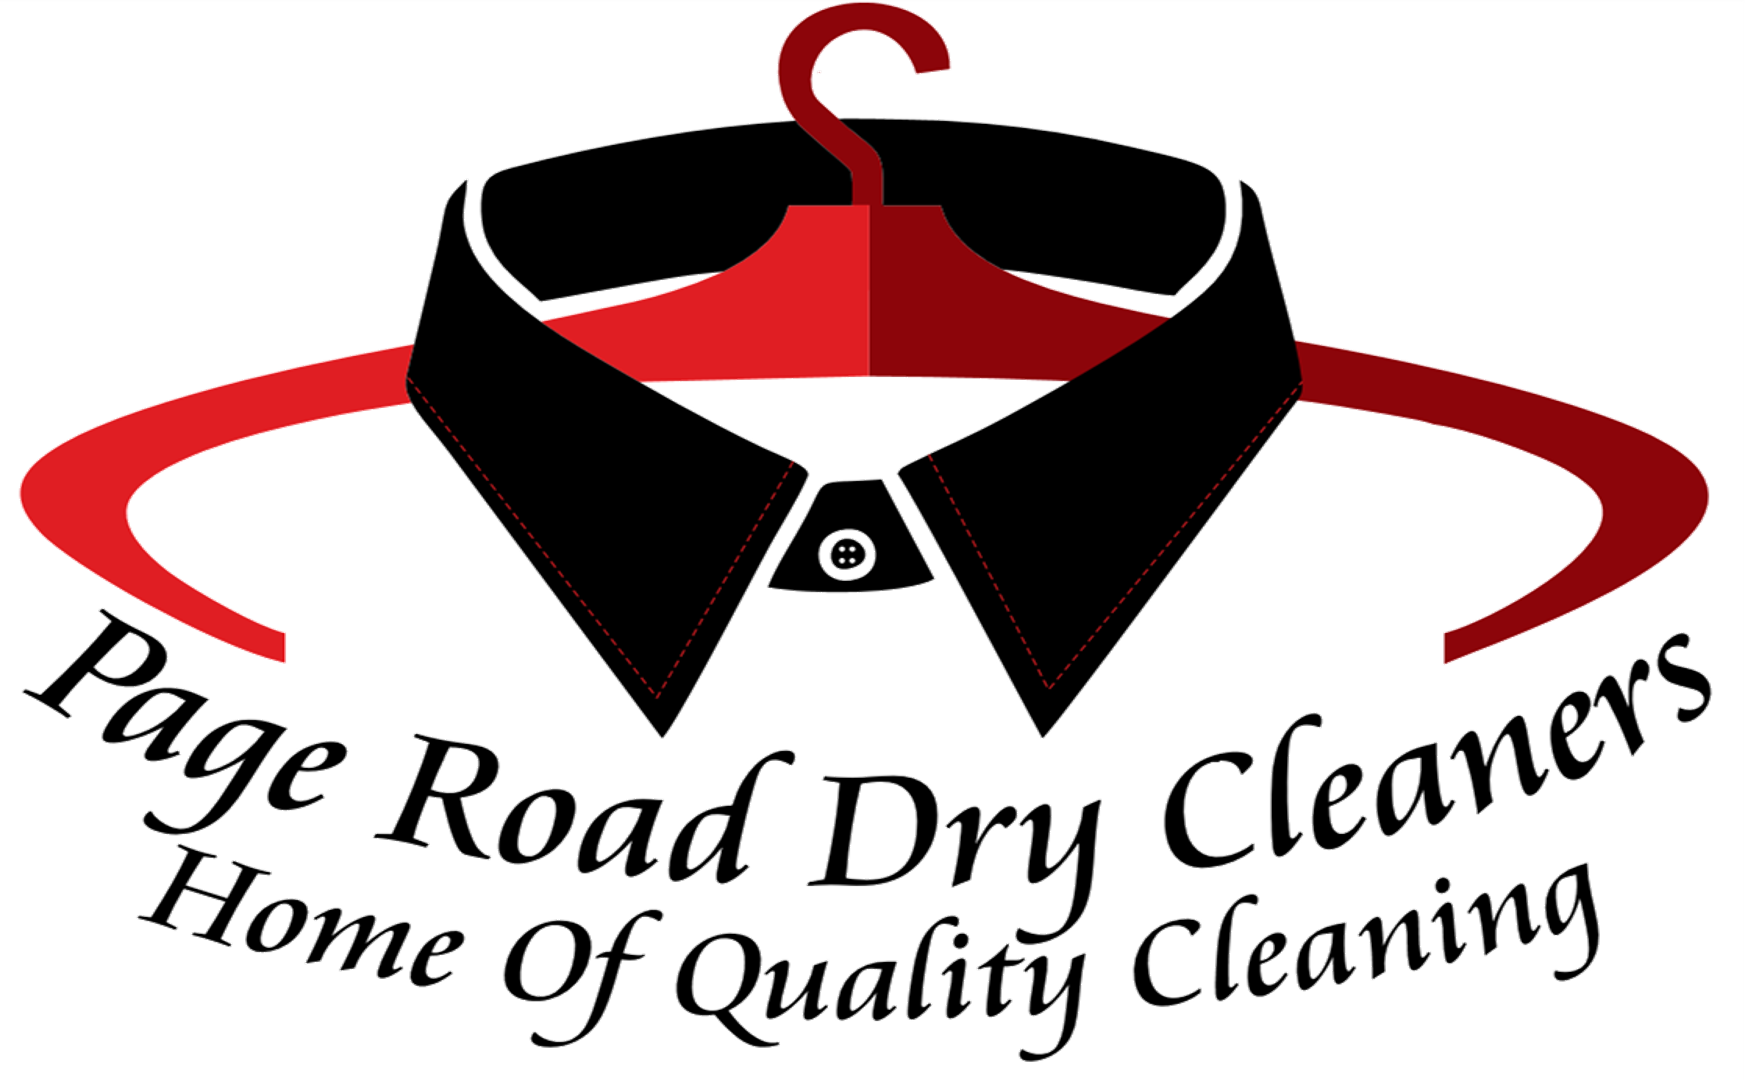 Page Road Dry Cleaners (1745x1080)